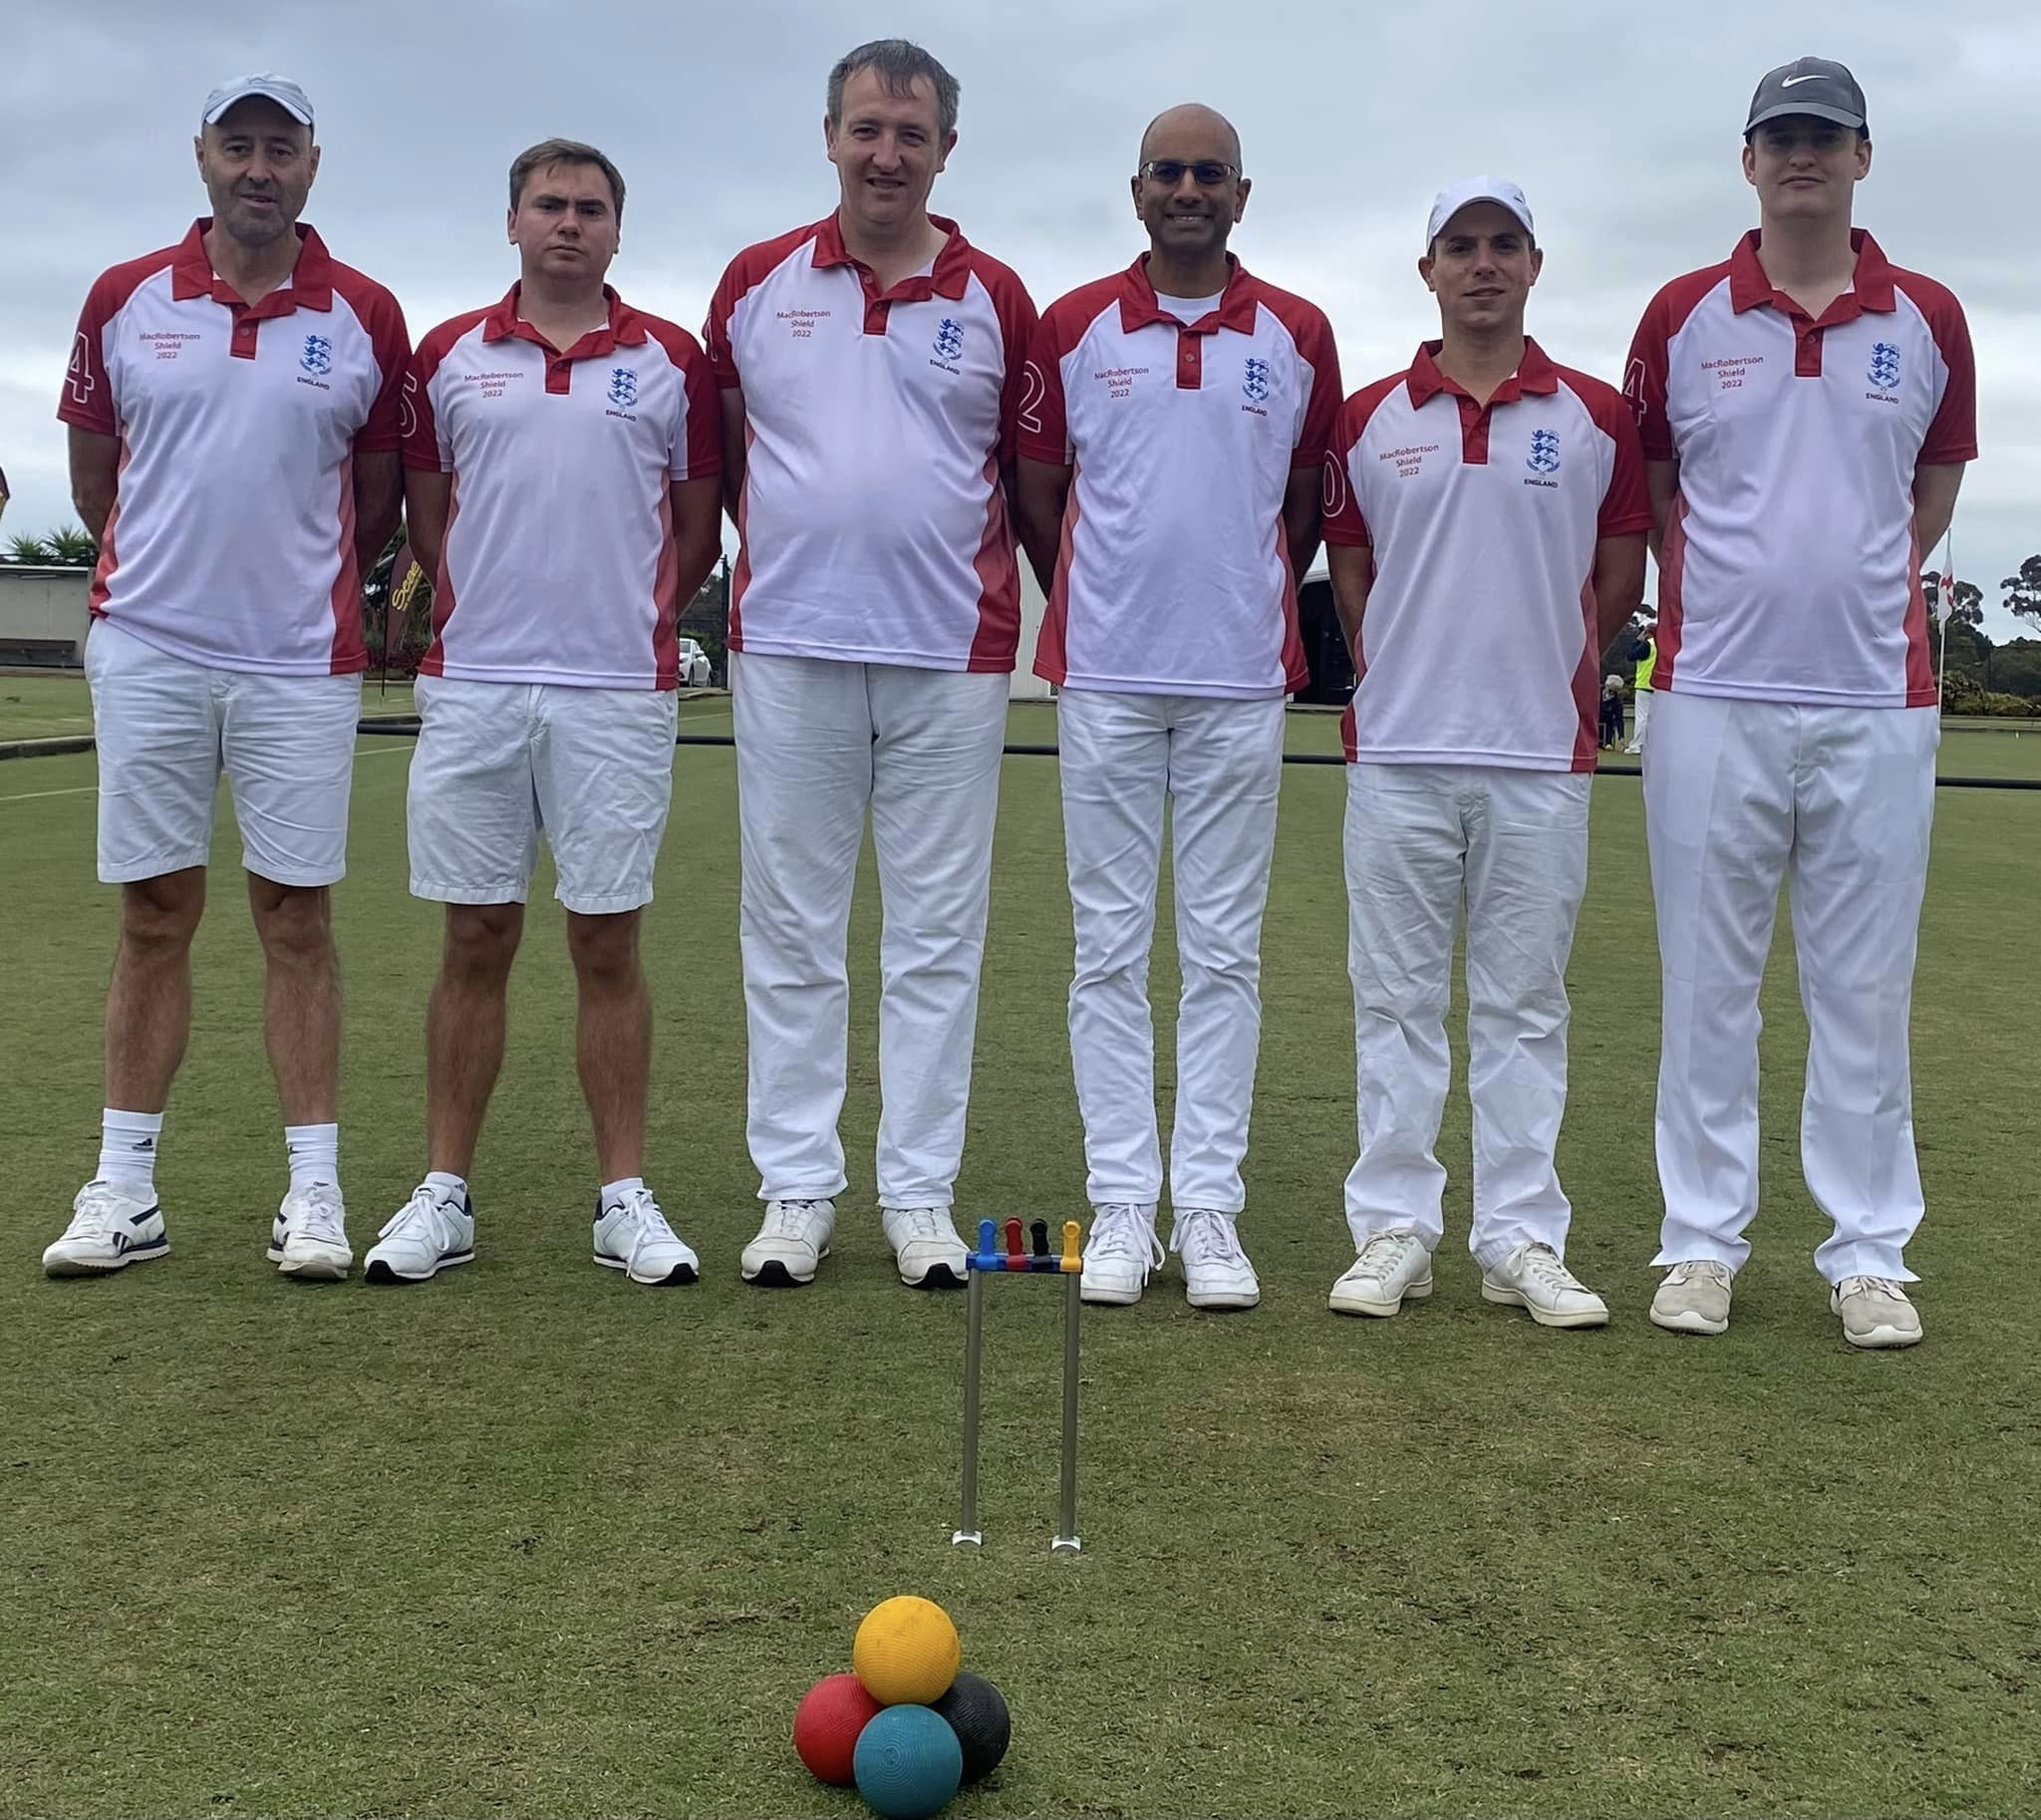 England capture Croquet World Cup crown with victory over hosts Australia